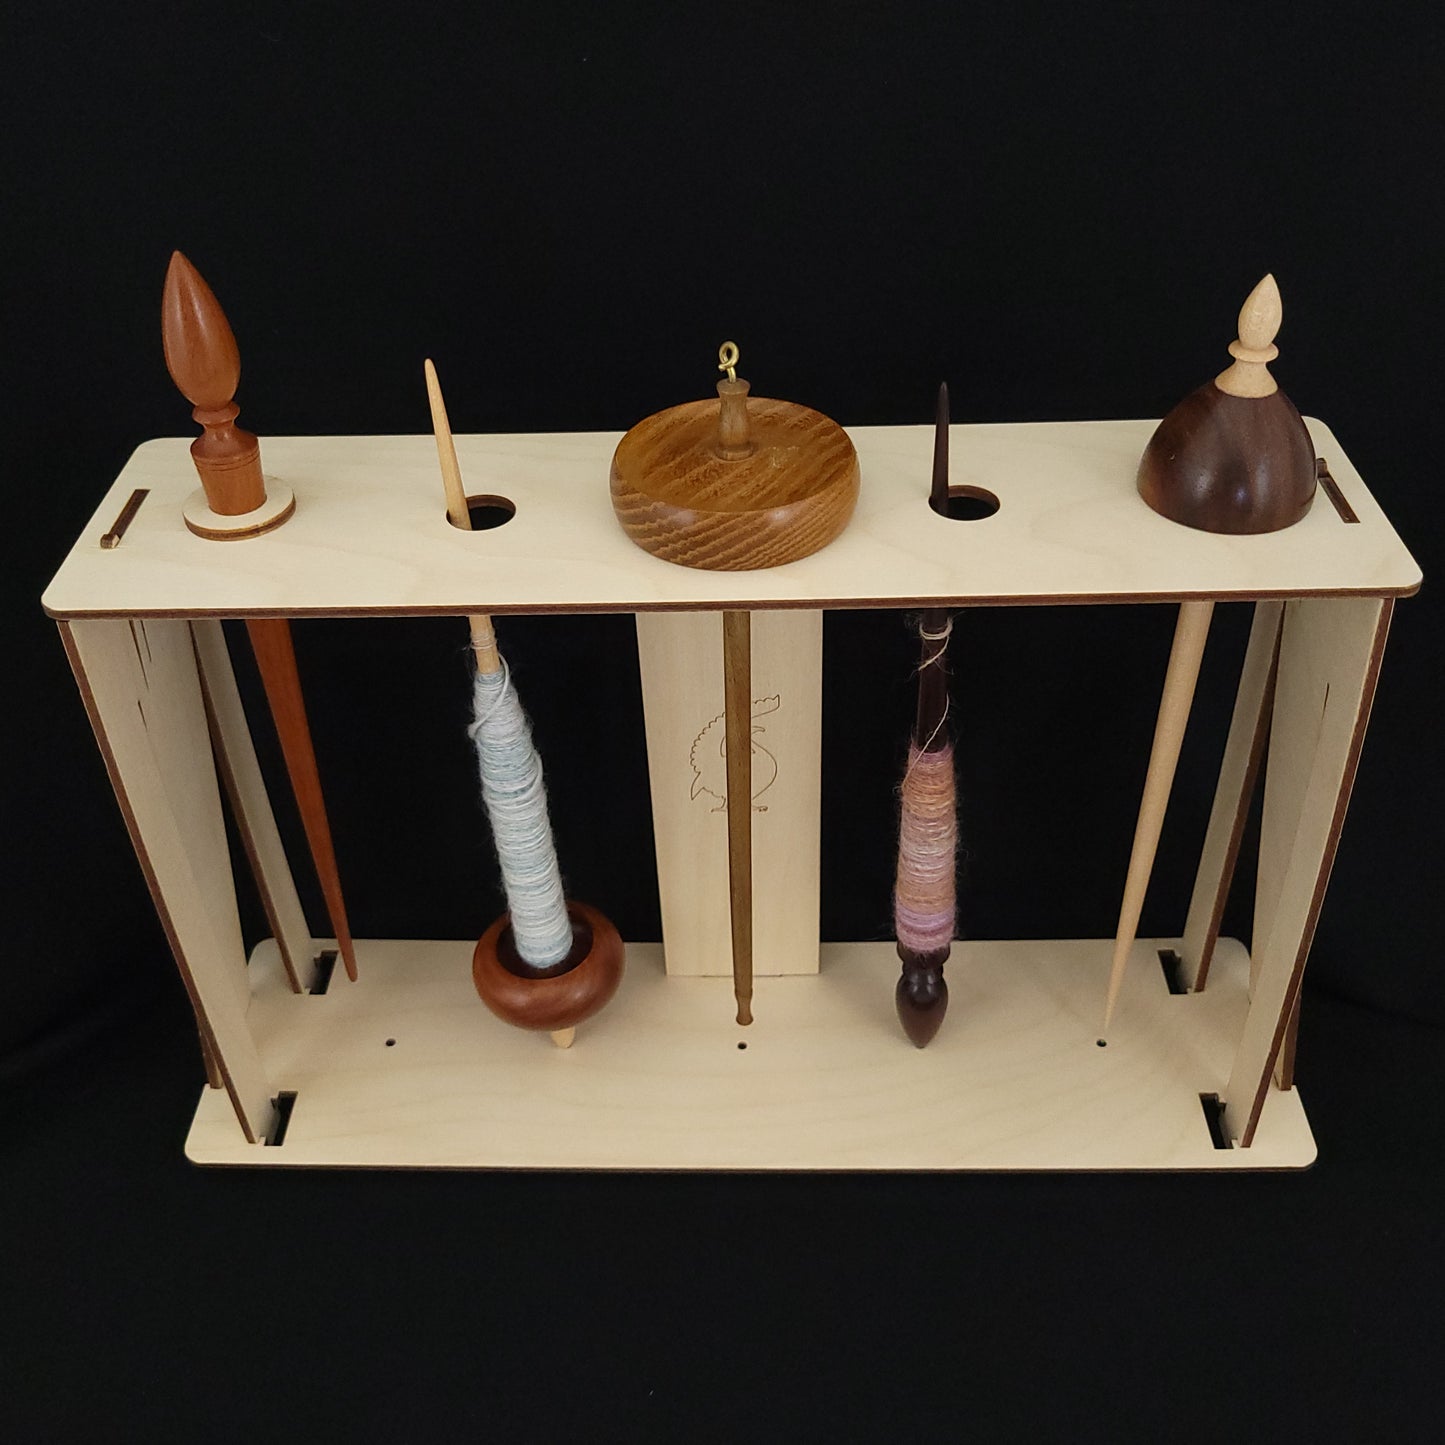 Spindle Storage Stand—Pocket Edition